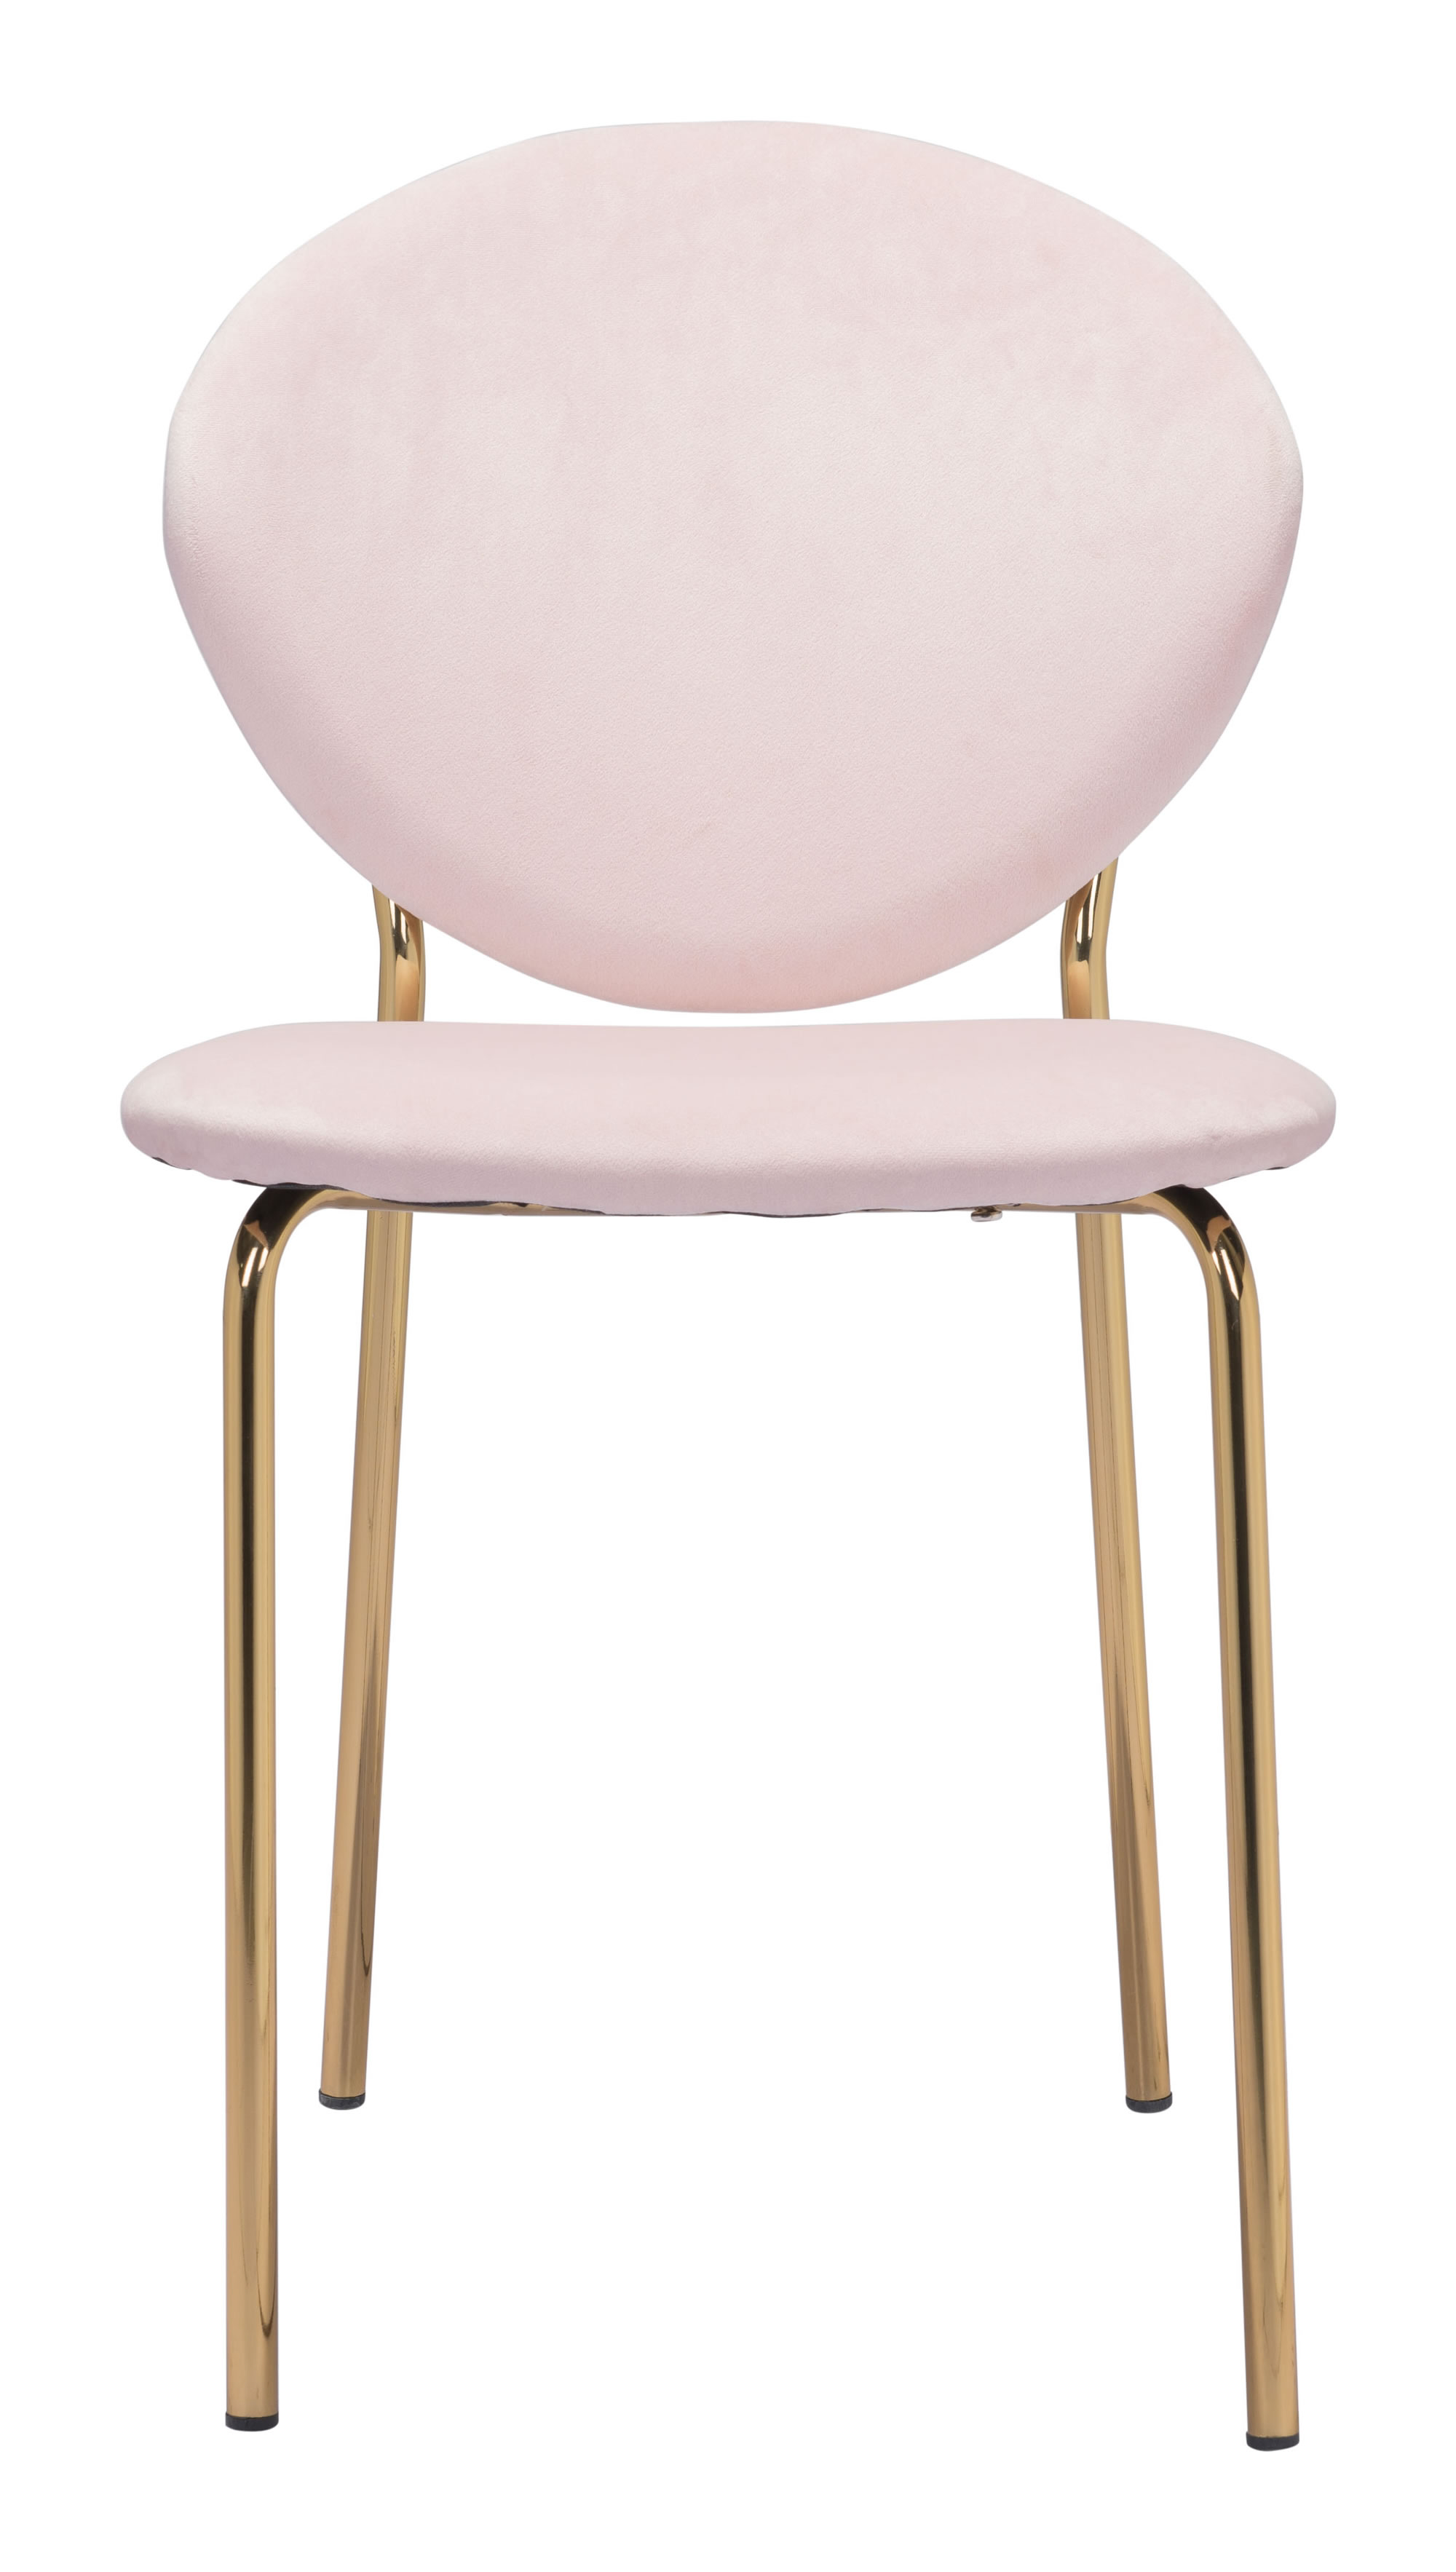 18.1" x 23.6" x 32.3" Pink & Gold, Velvet, Steel & Plywood, Chair - Set of 2